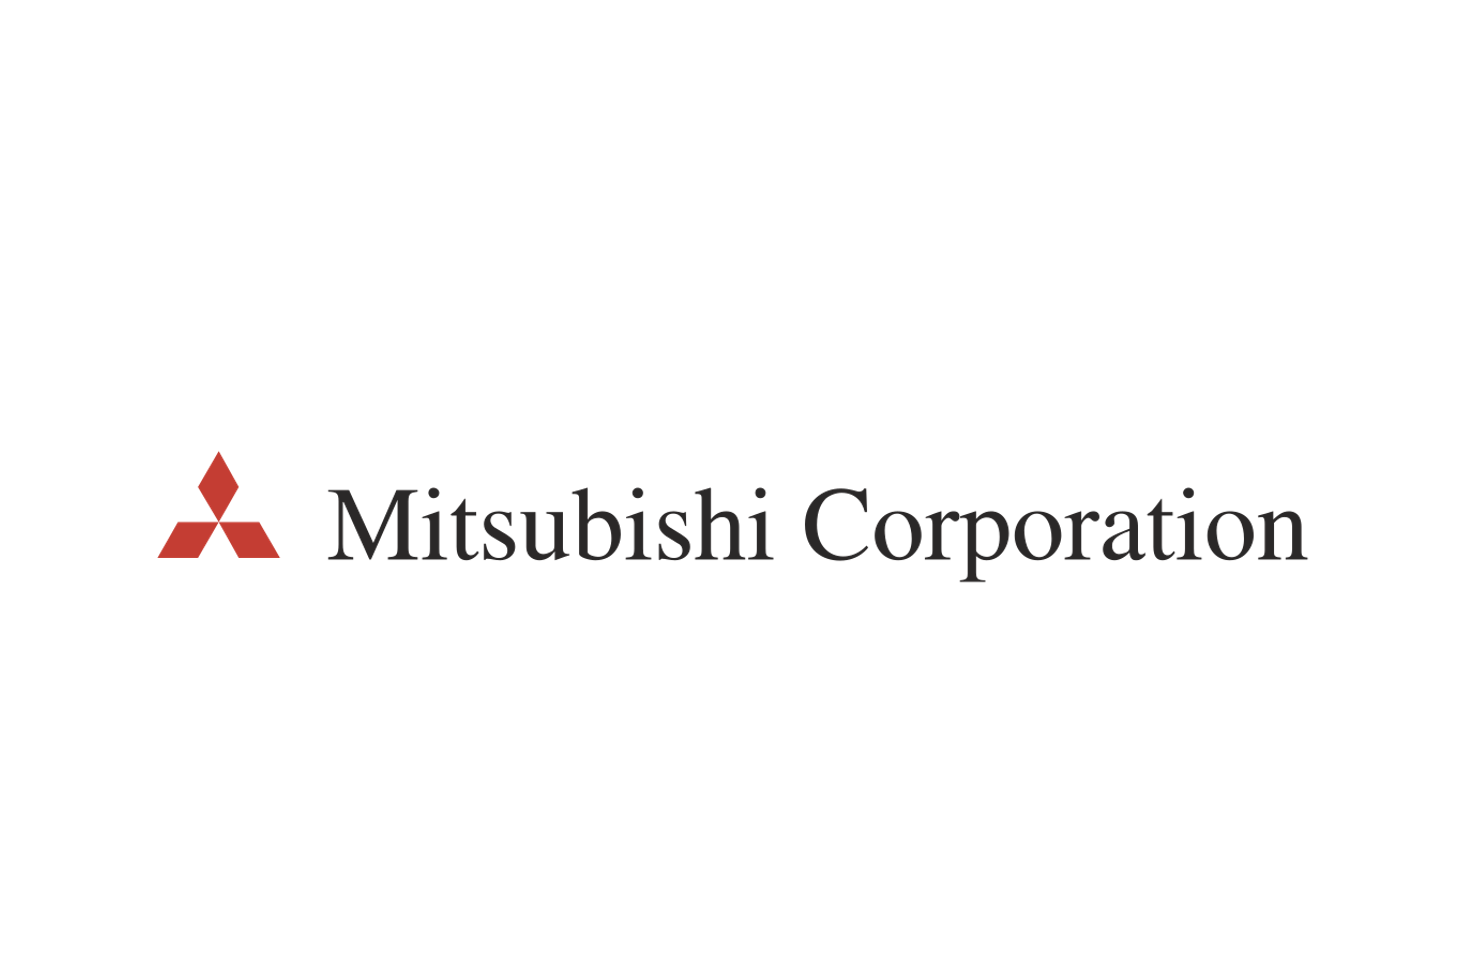 Call for Proposal Mitsubishi Corporation Research Funding 2023